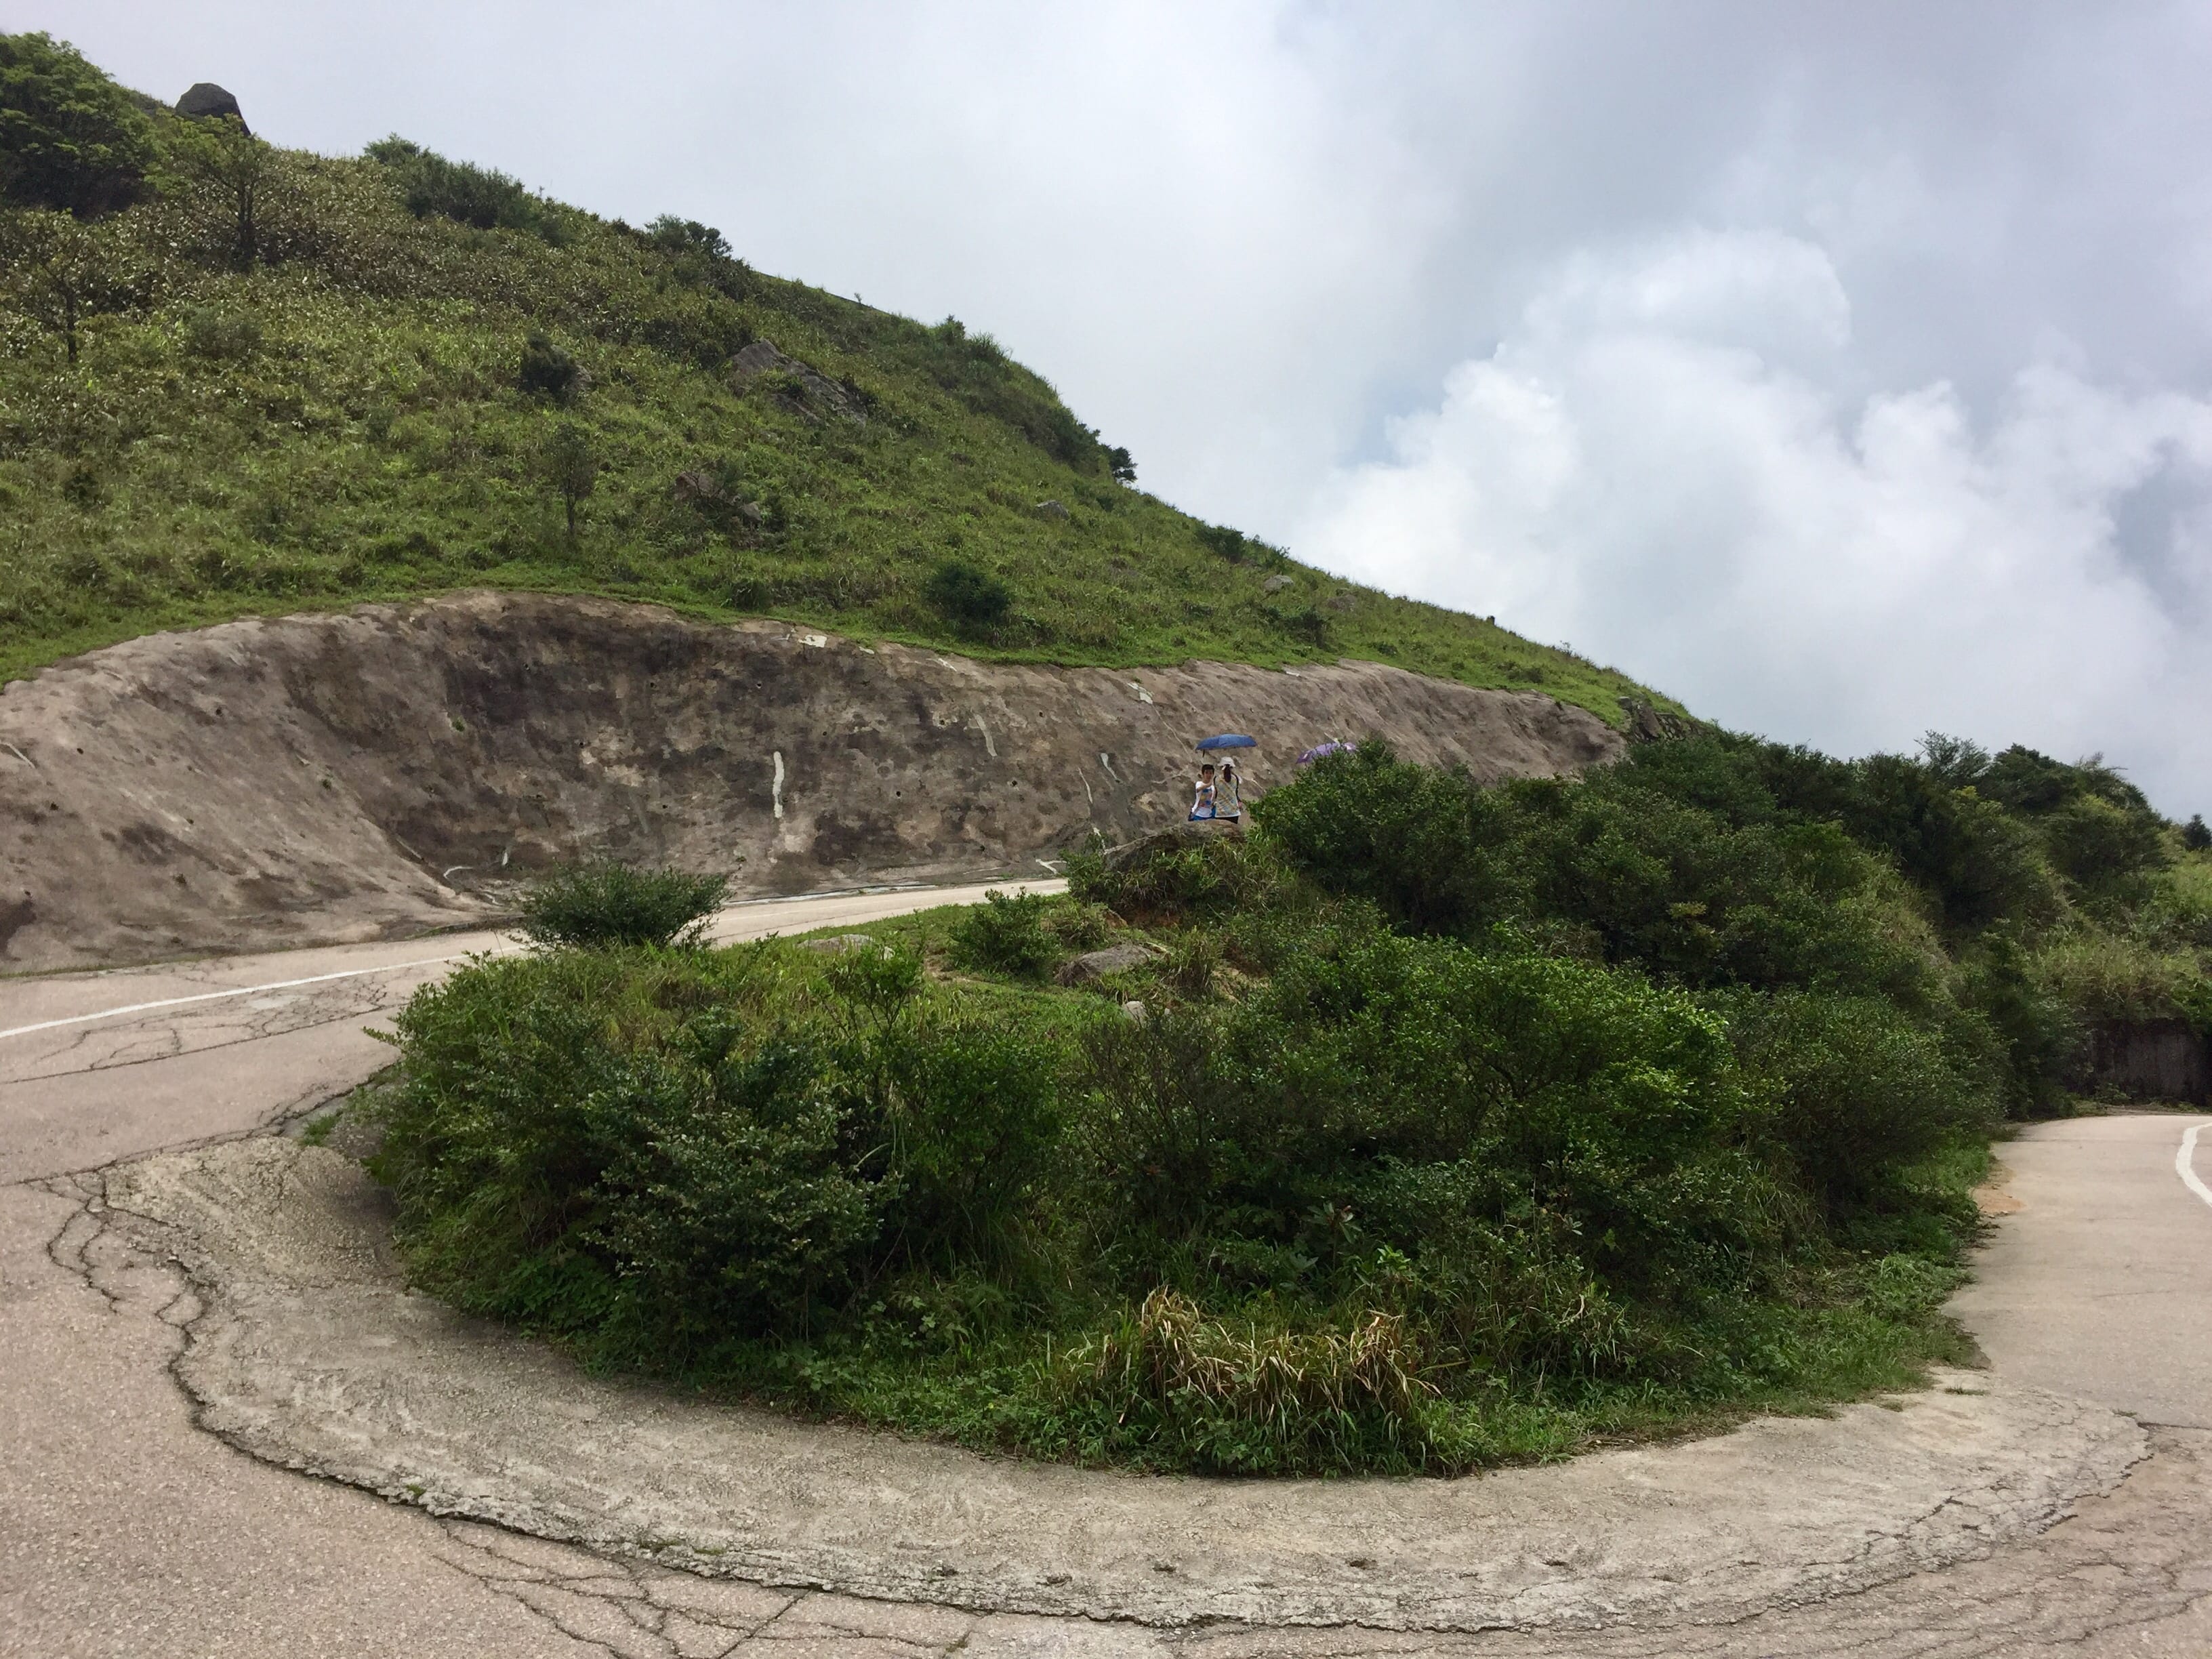 Hiking around one of the Hairpin Bends